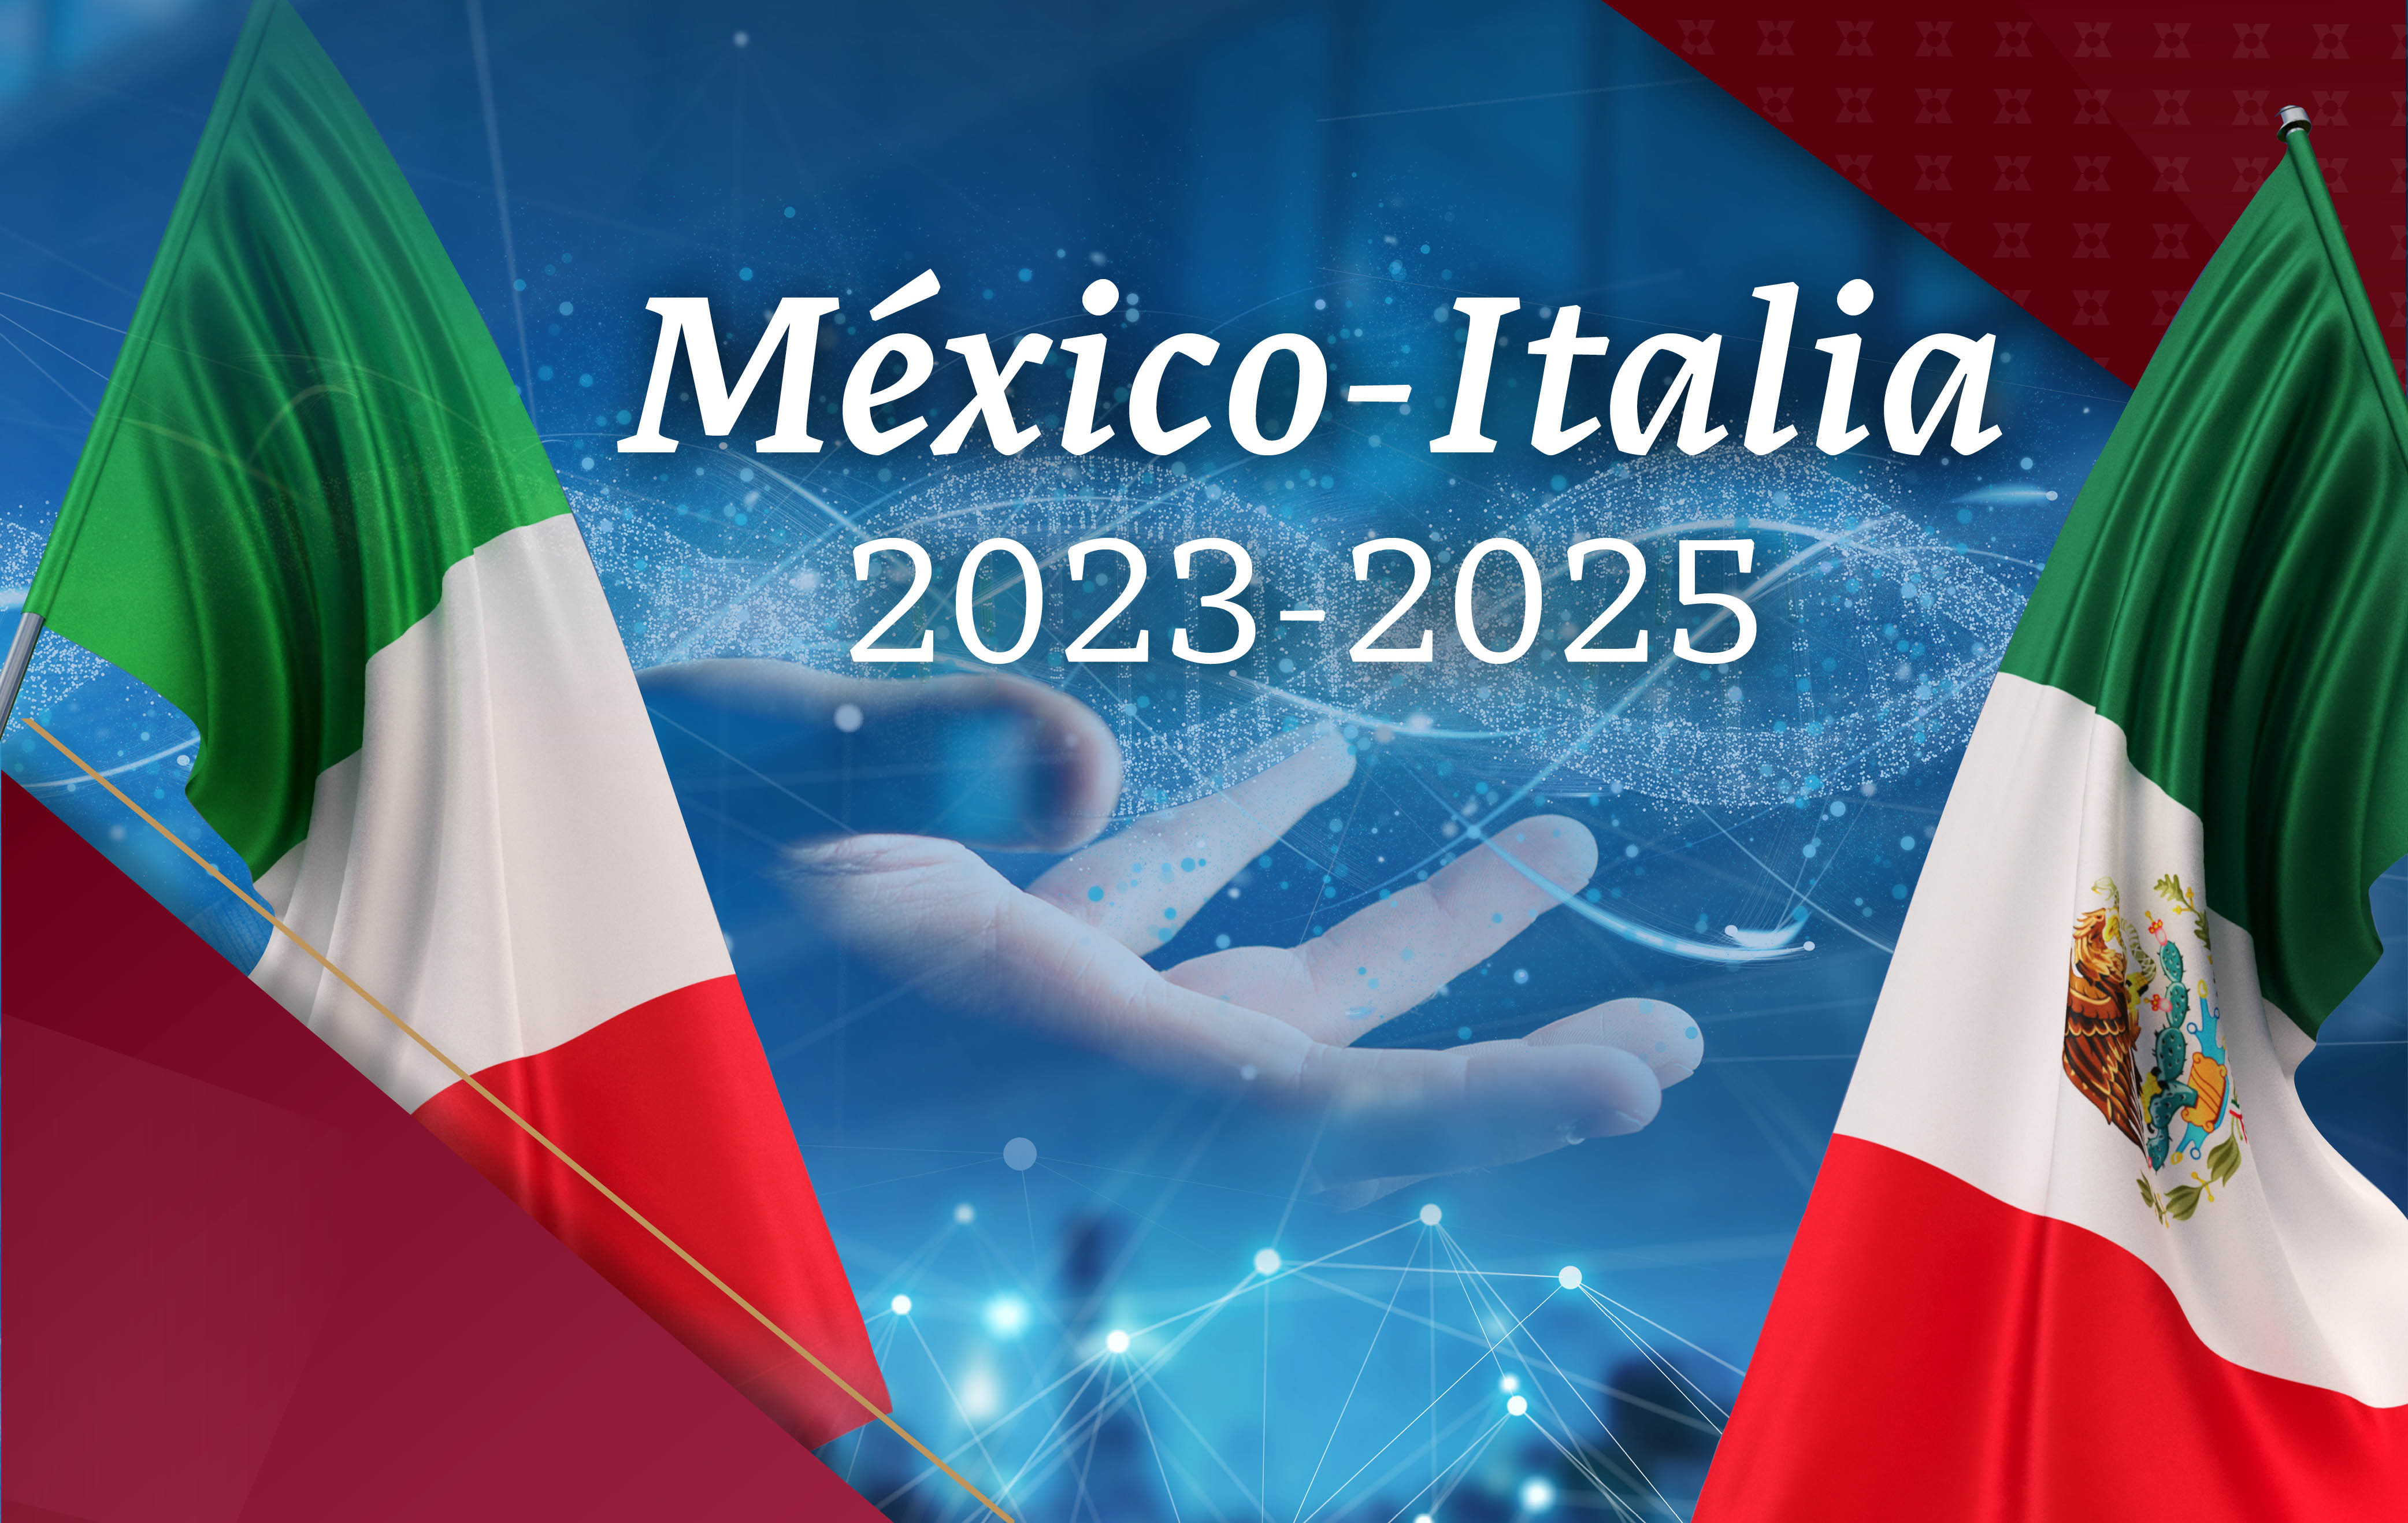 ITALY-MEXICO SCIENCE AND TECHNOLOGY COOPERATION CALL FOR JOINT RESEARCH PROPOSALS FOR THE YEARS 2023-2025